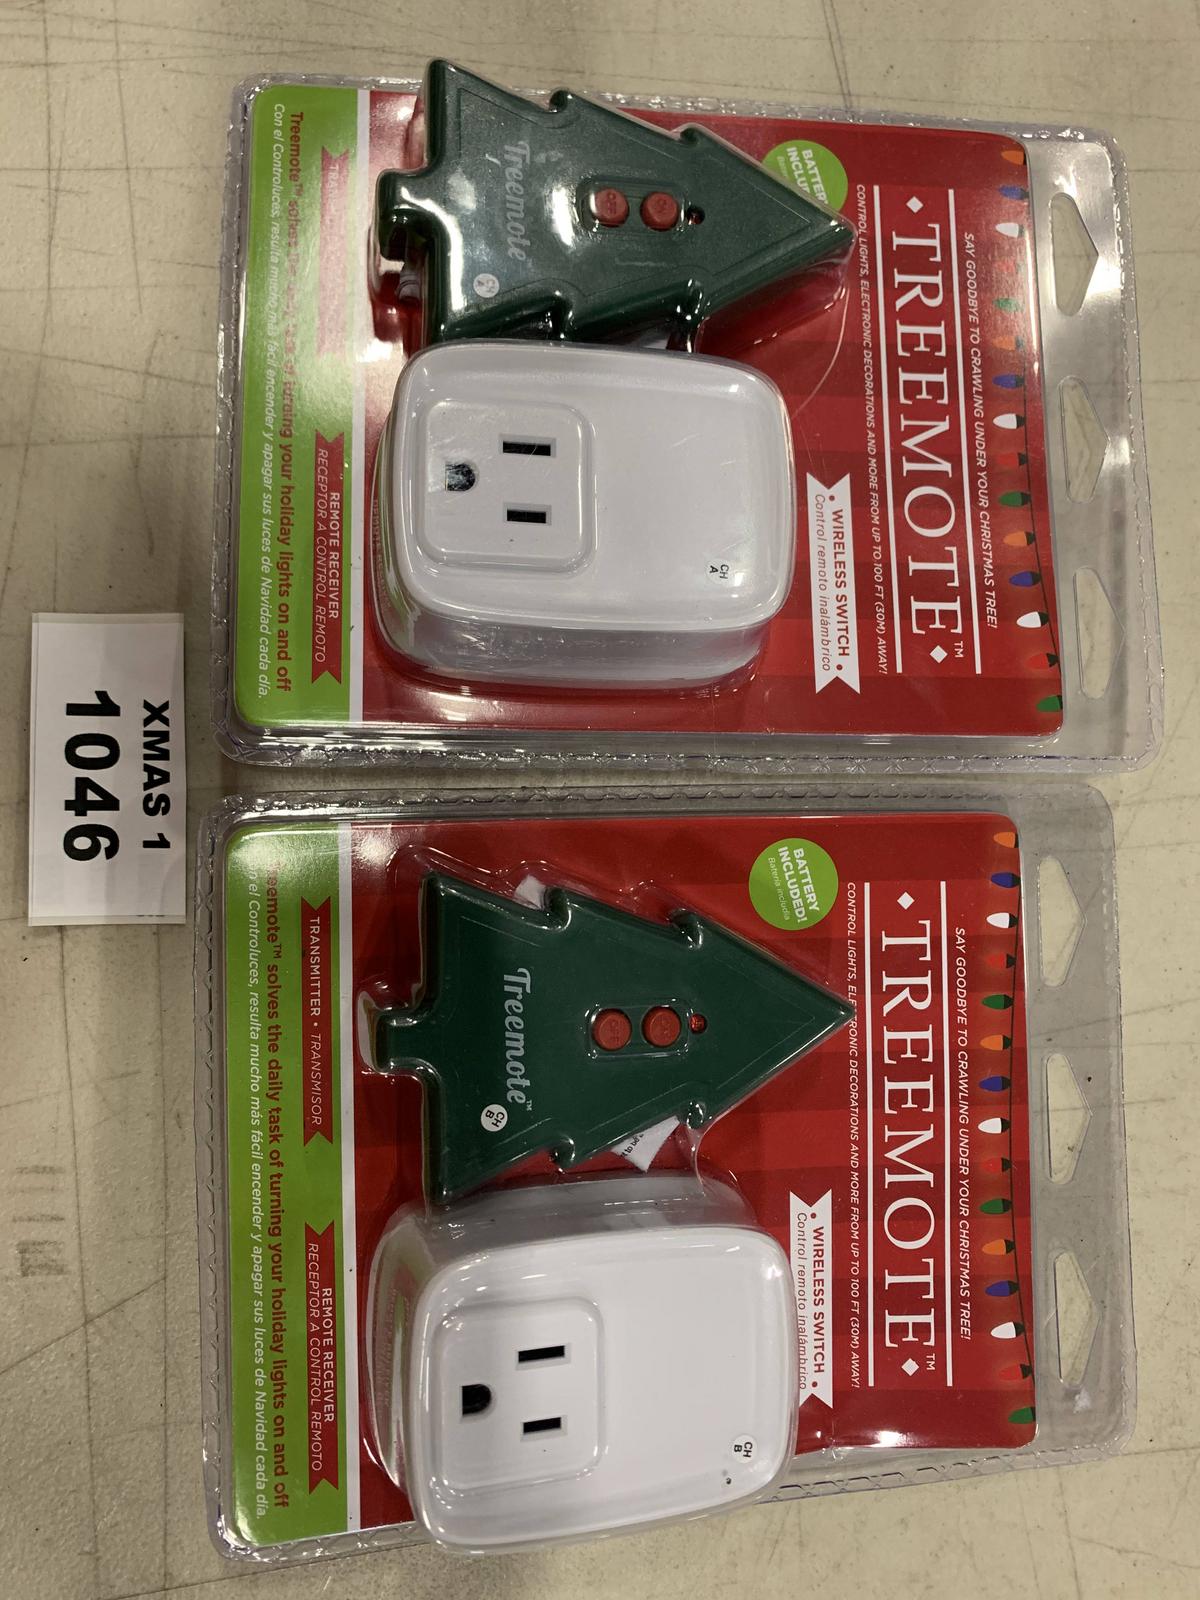 Treemote Wireless Remote Switch for Christmas Tree and Other Lights